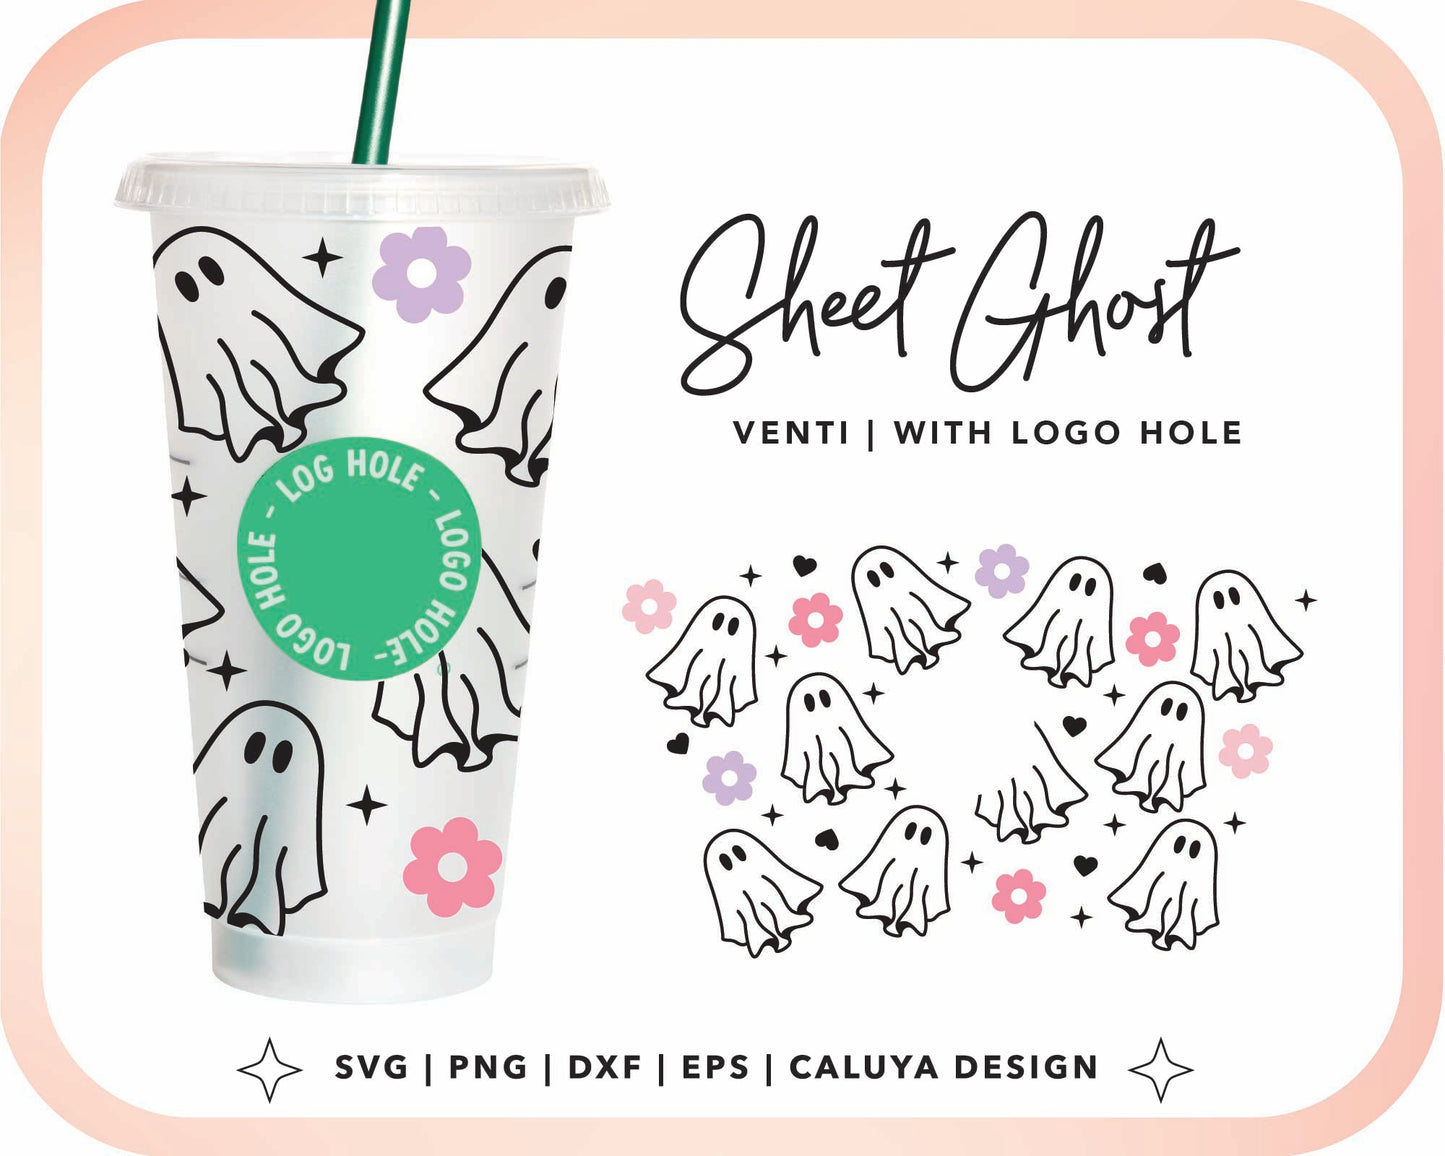 With Logo Venti Cup Wrap SVG | Sheet Ghost Cup Wrap Cut File for Cricut, Cameo Silhouette | Free SVG Cut File